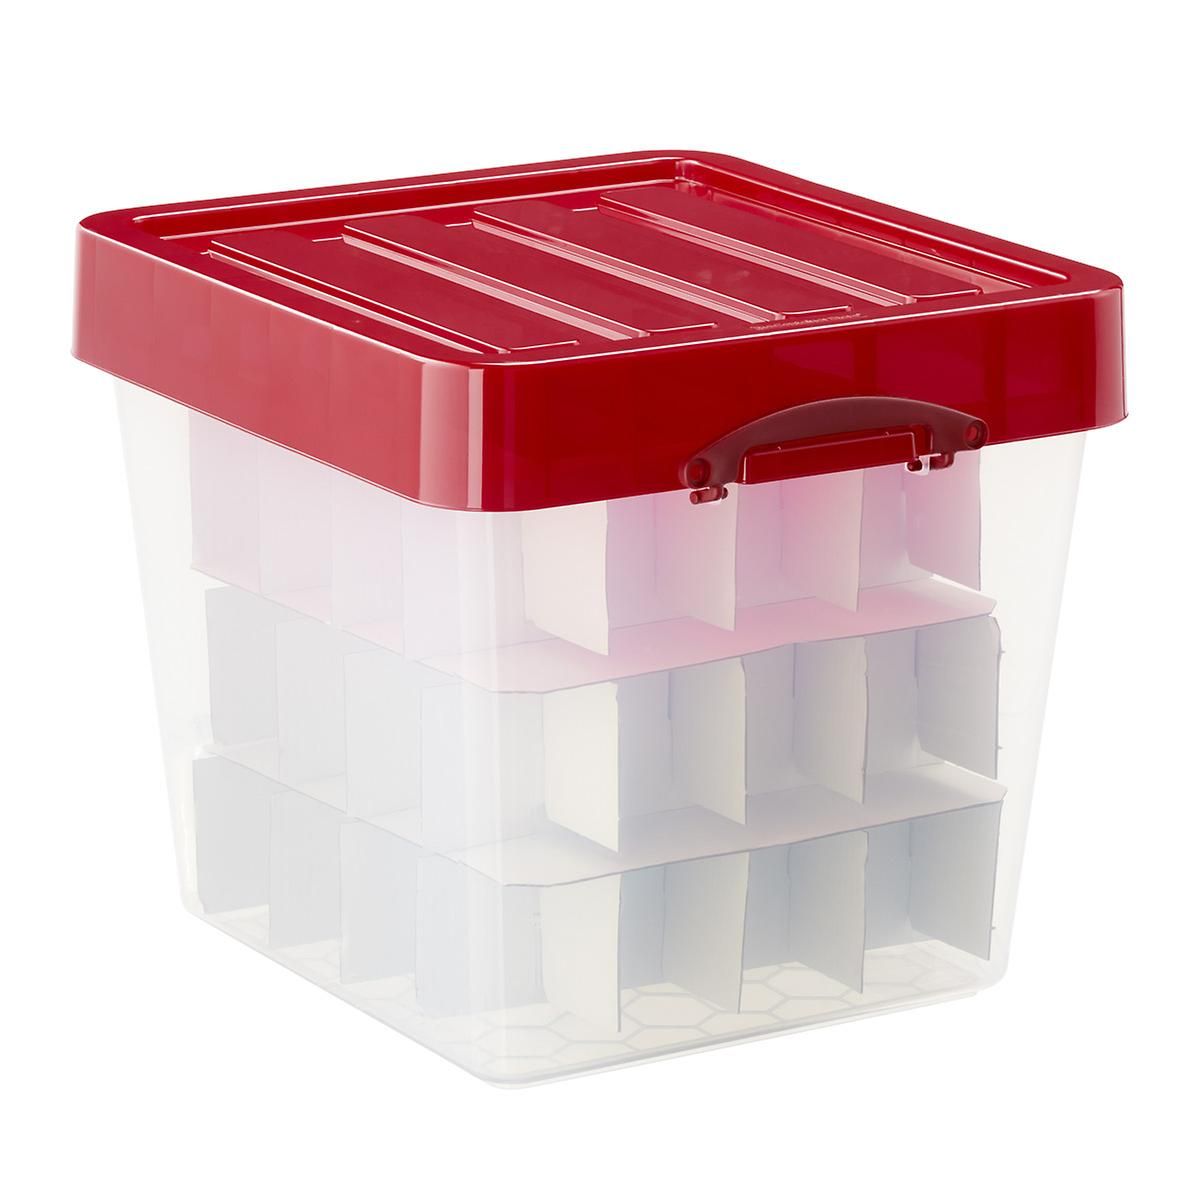 60 Ltr. X-Large Premier Modular Tote w/ Insert | The Container Store